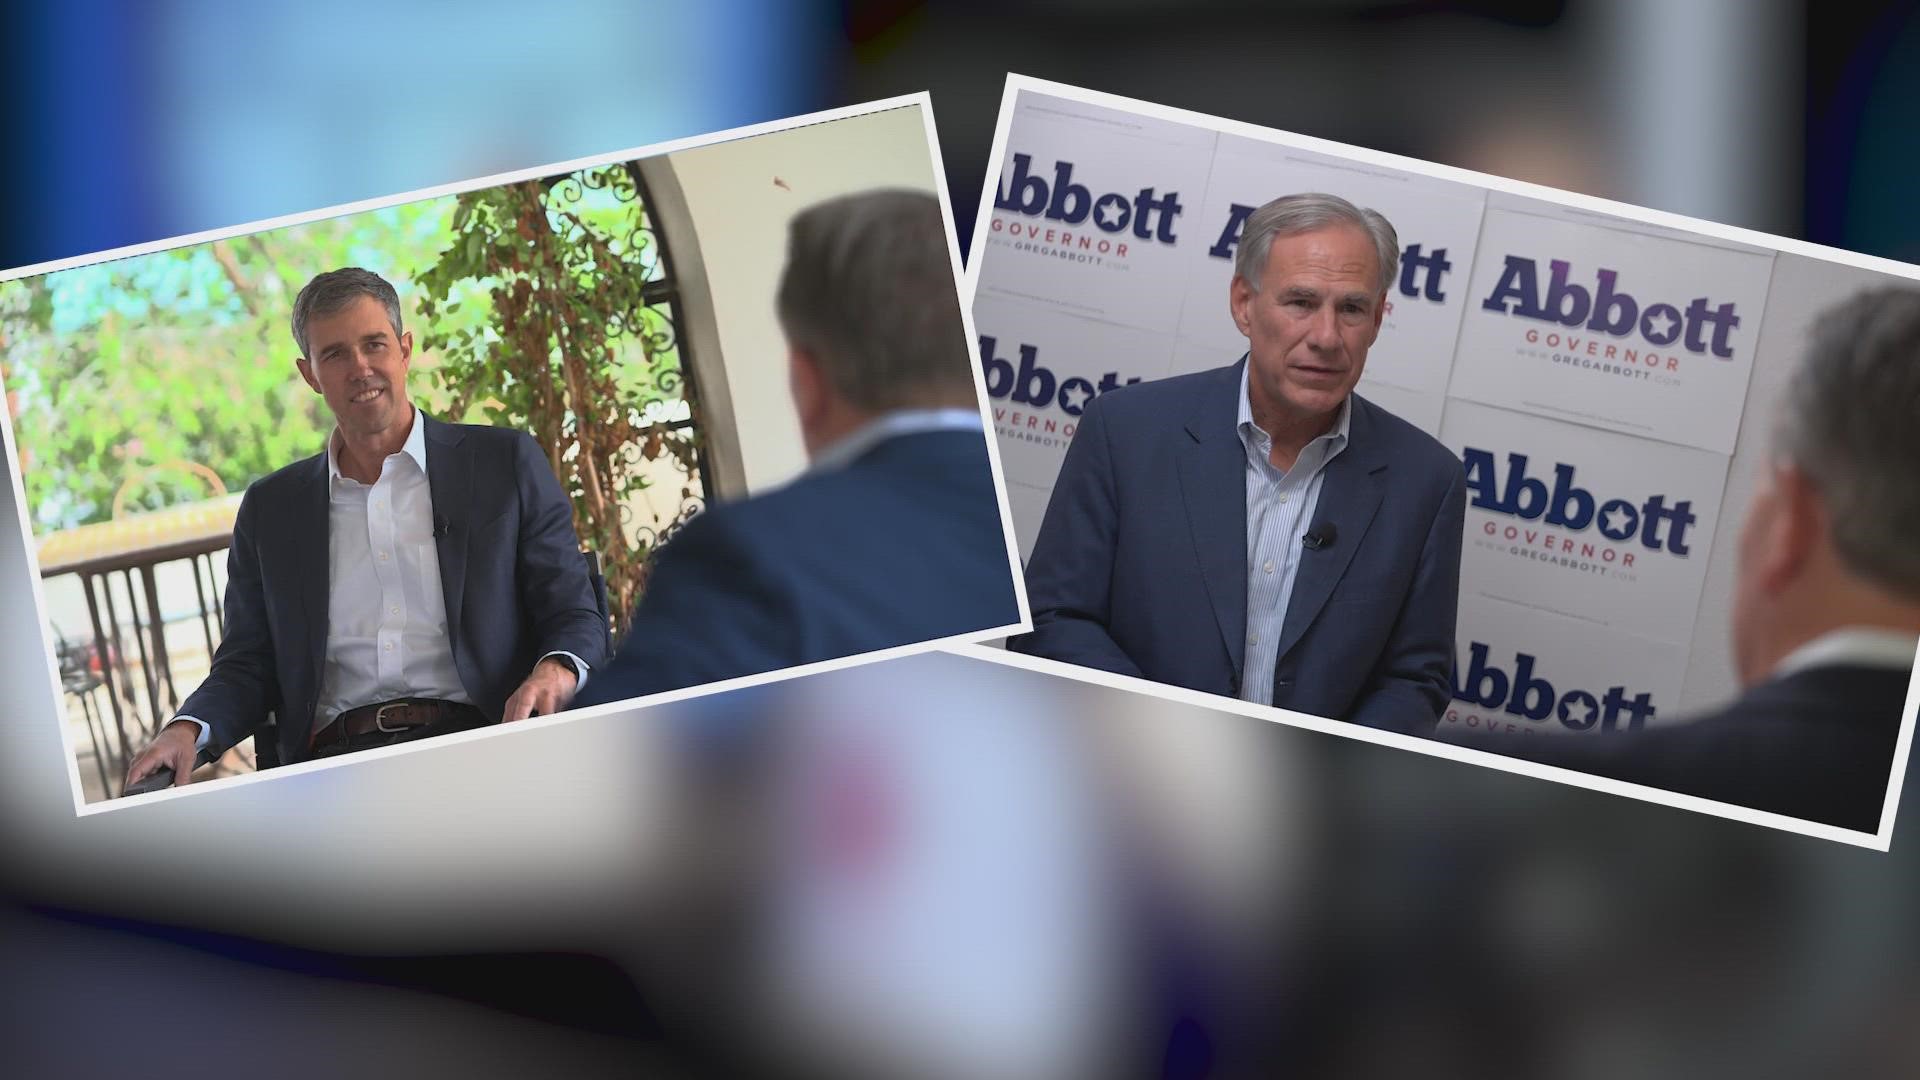 WFAA's Senior Political Reporter Jason Whitely sits down with both governor race candidates ahead of the Nov. 8 election.